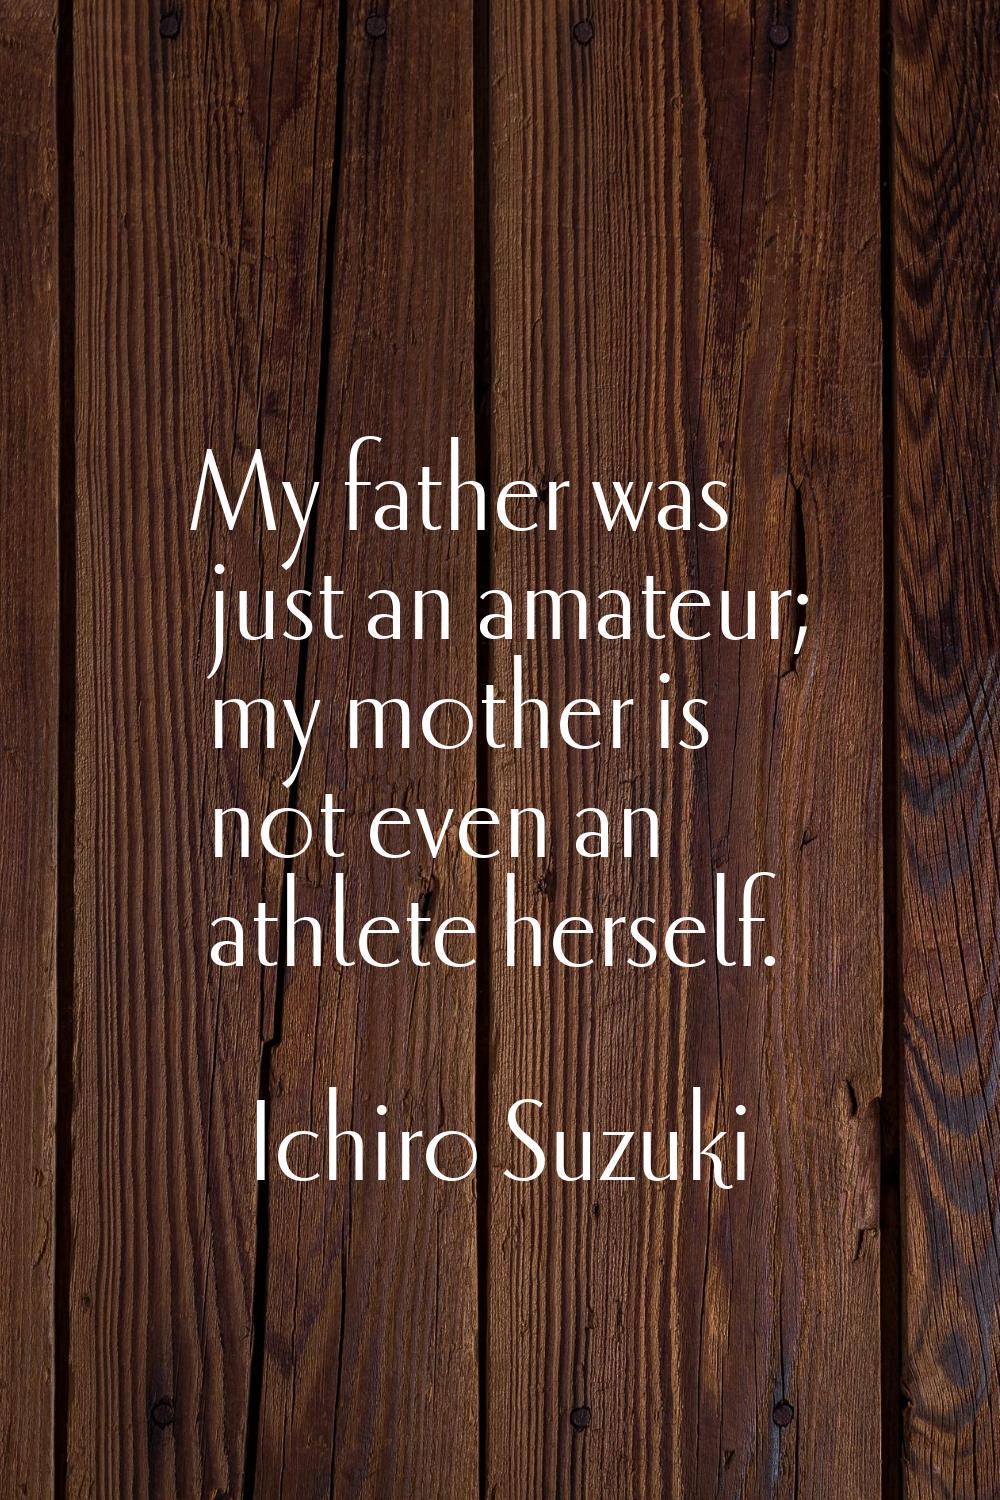 My father was just an amateur; my mother is not even an athlete herself.